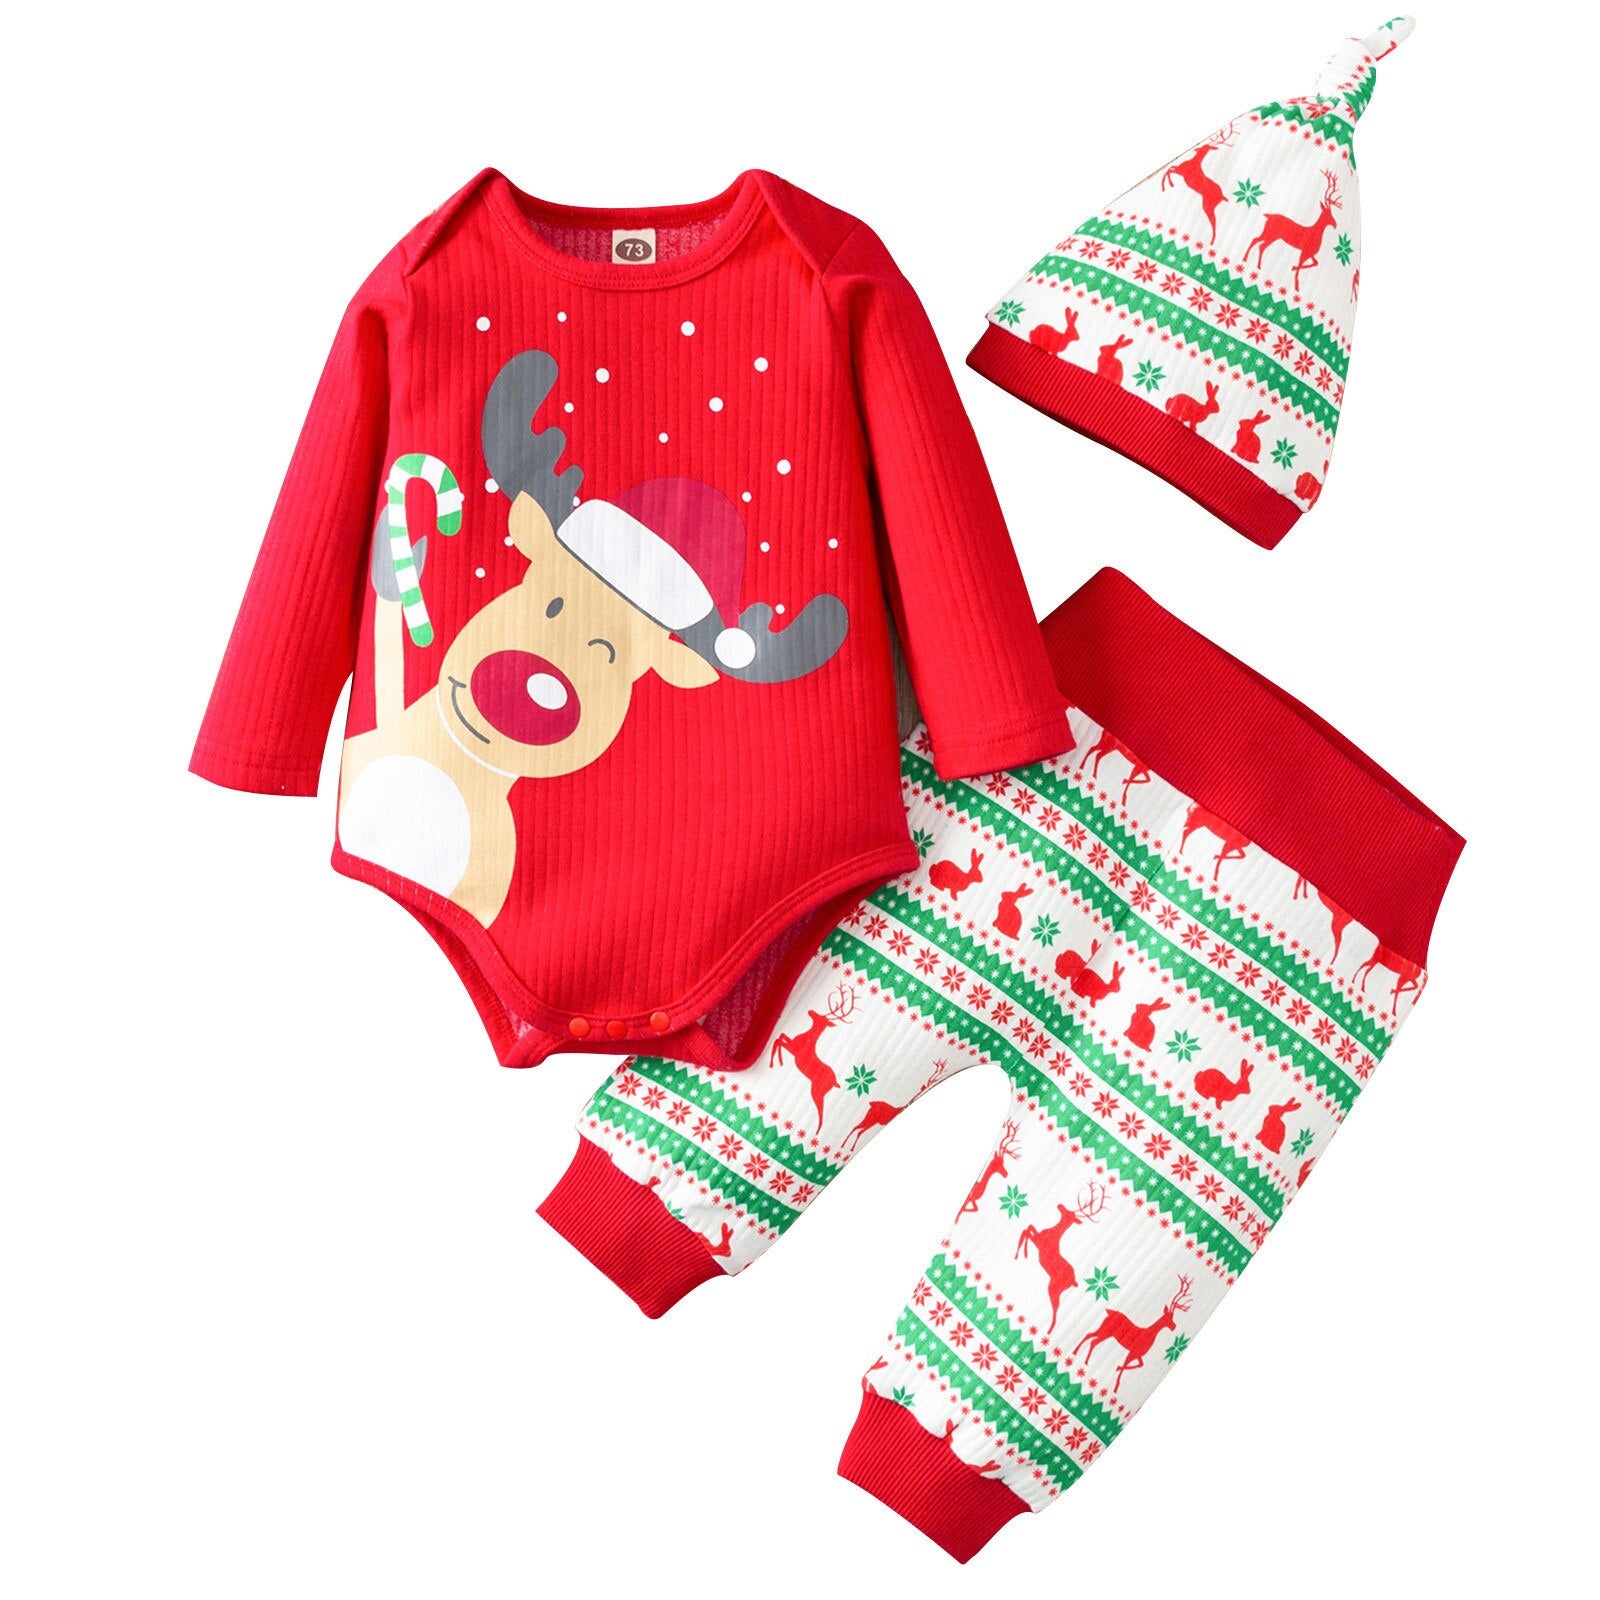 Boys Girls Christmas Romper Infant Baby Long Sleeves Outfit Clothes Bodysuit